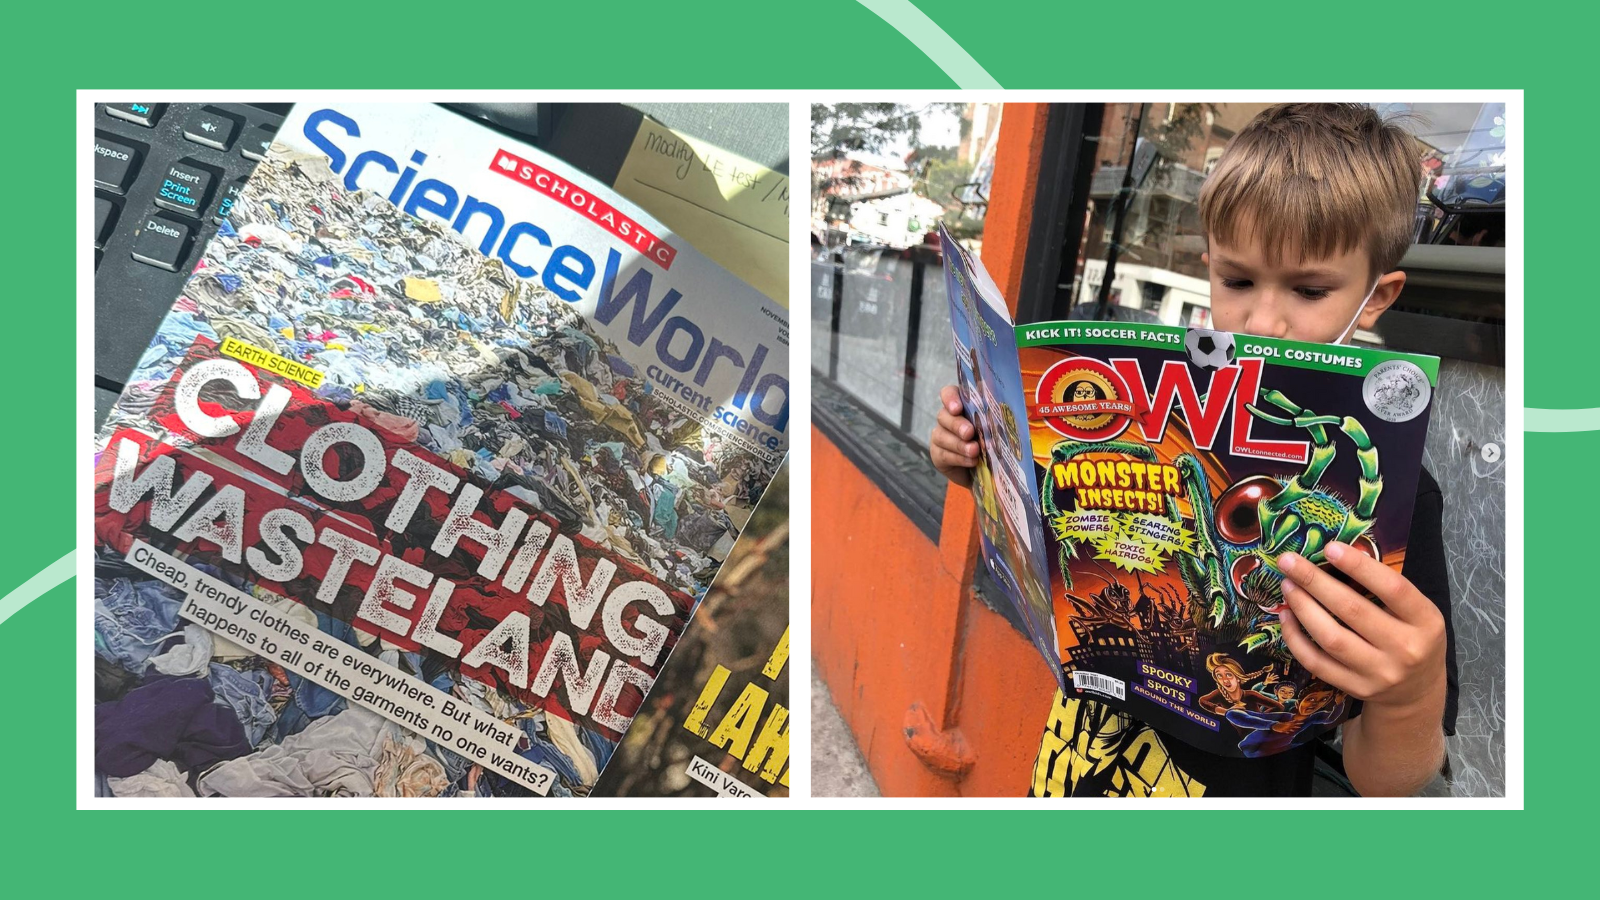 Example of science magazines including Science World and Owl.